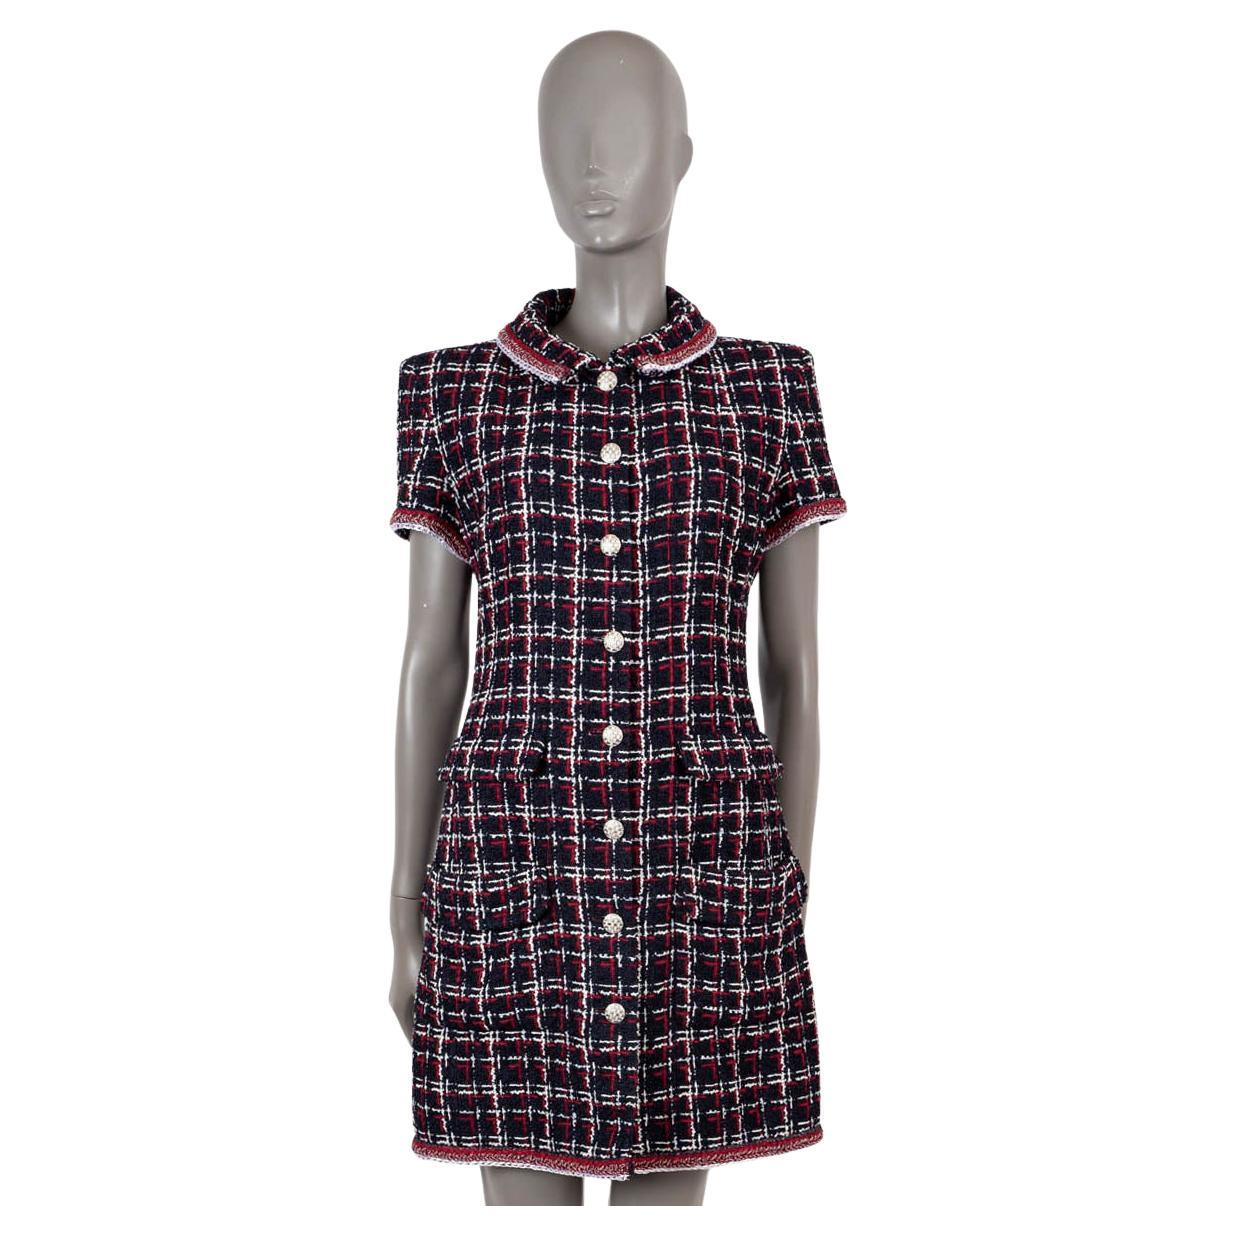 CHANEL navy blue red white viscose 2020 20S TWEED SHIRT Dress 40 M For Sale